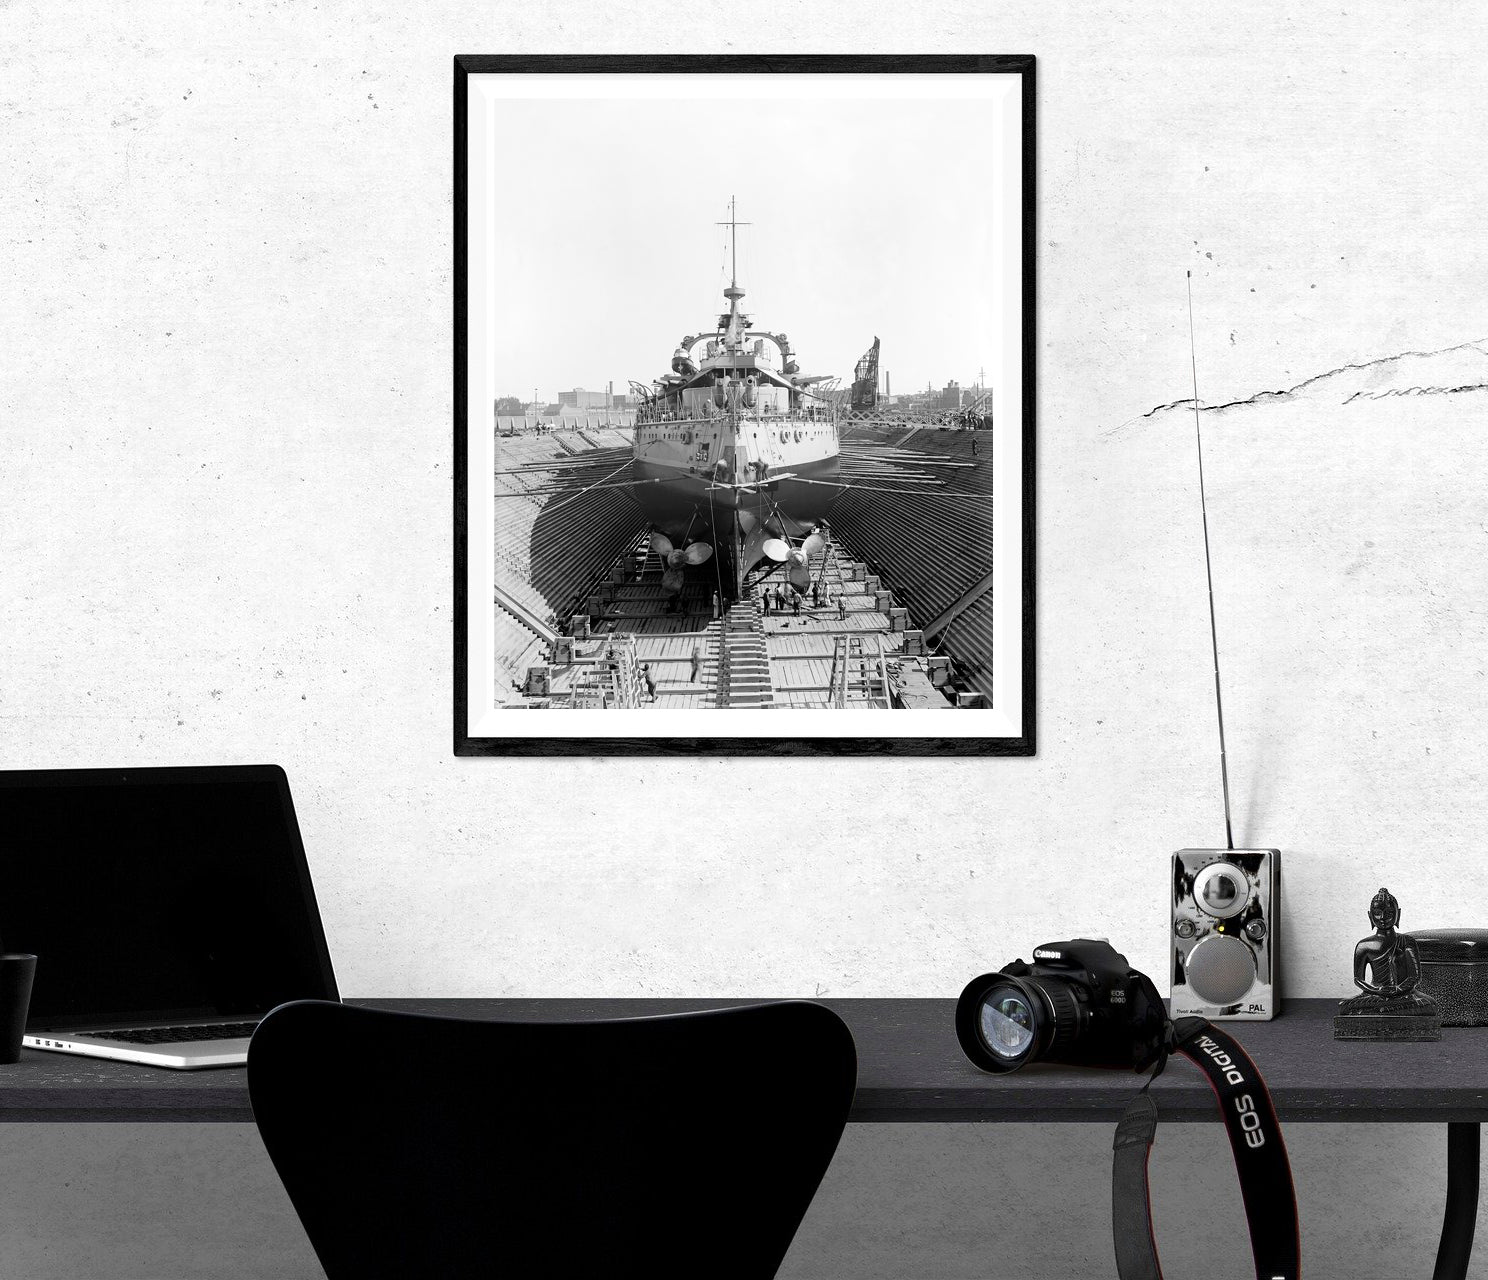 A framed paper print of a ship in Brooklyn Navy Yard's dry dock hanging on a rustic wall above a desk